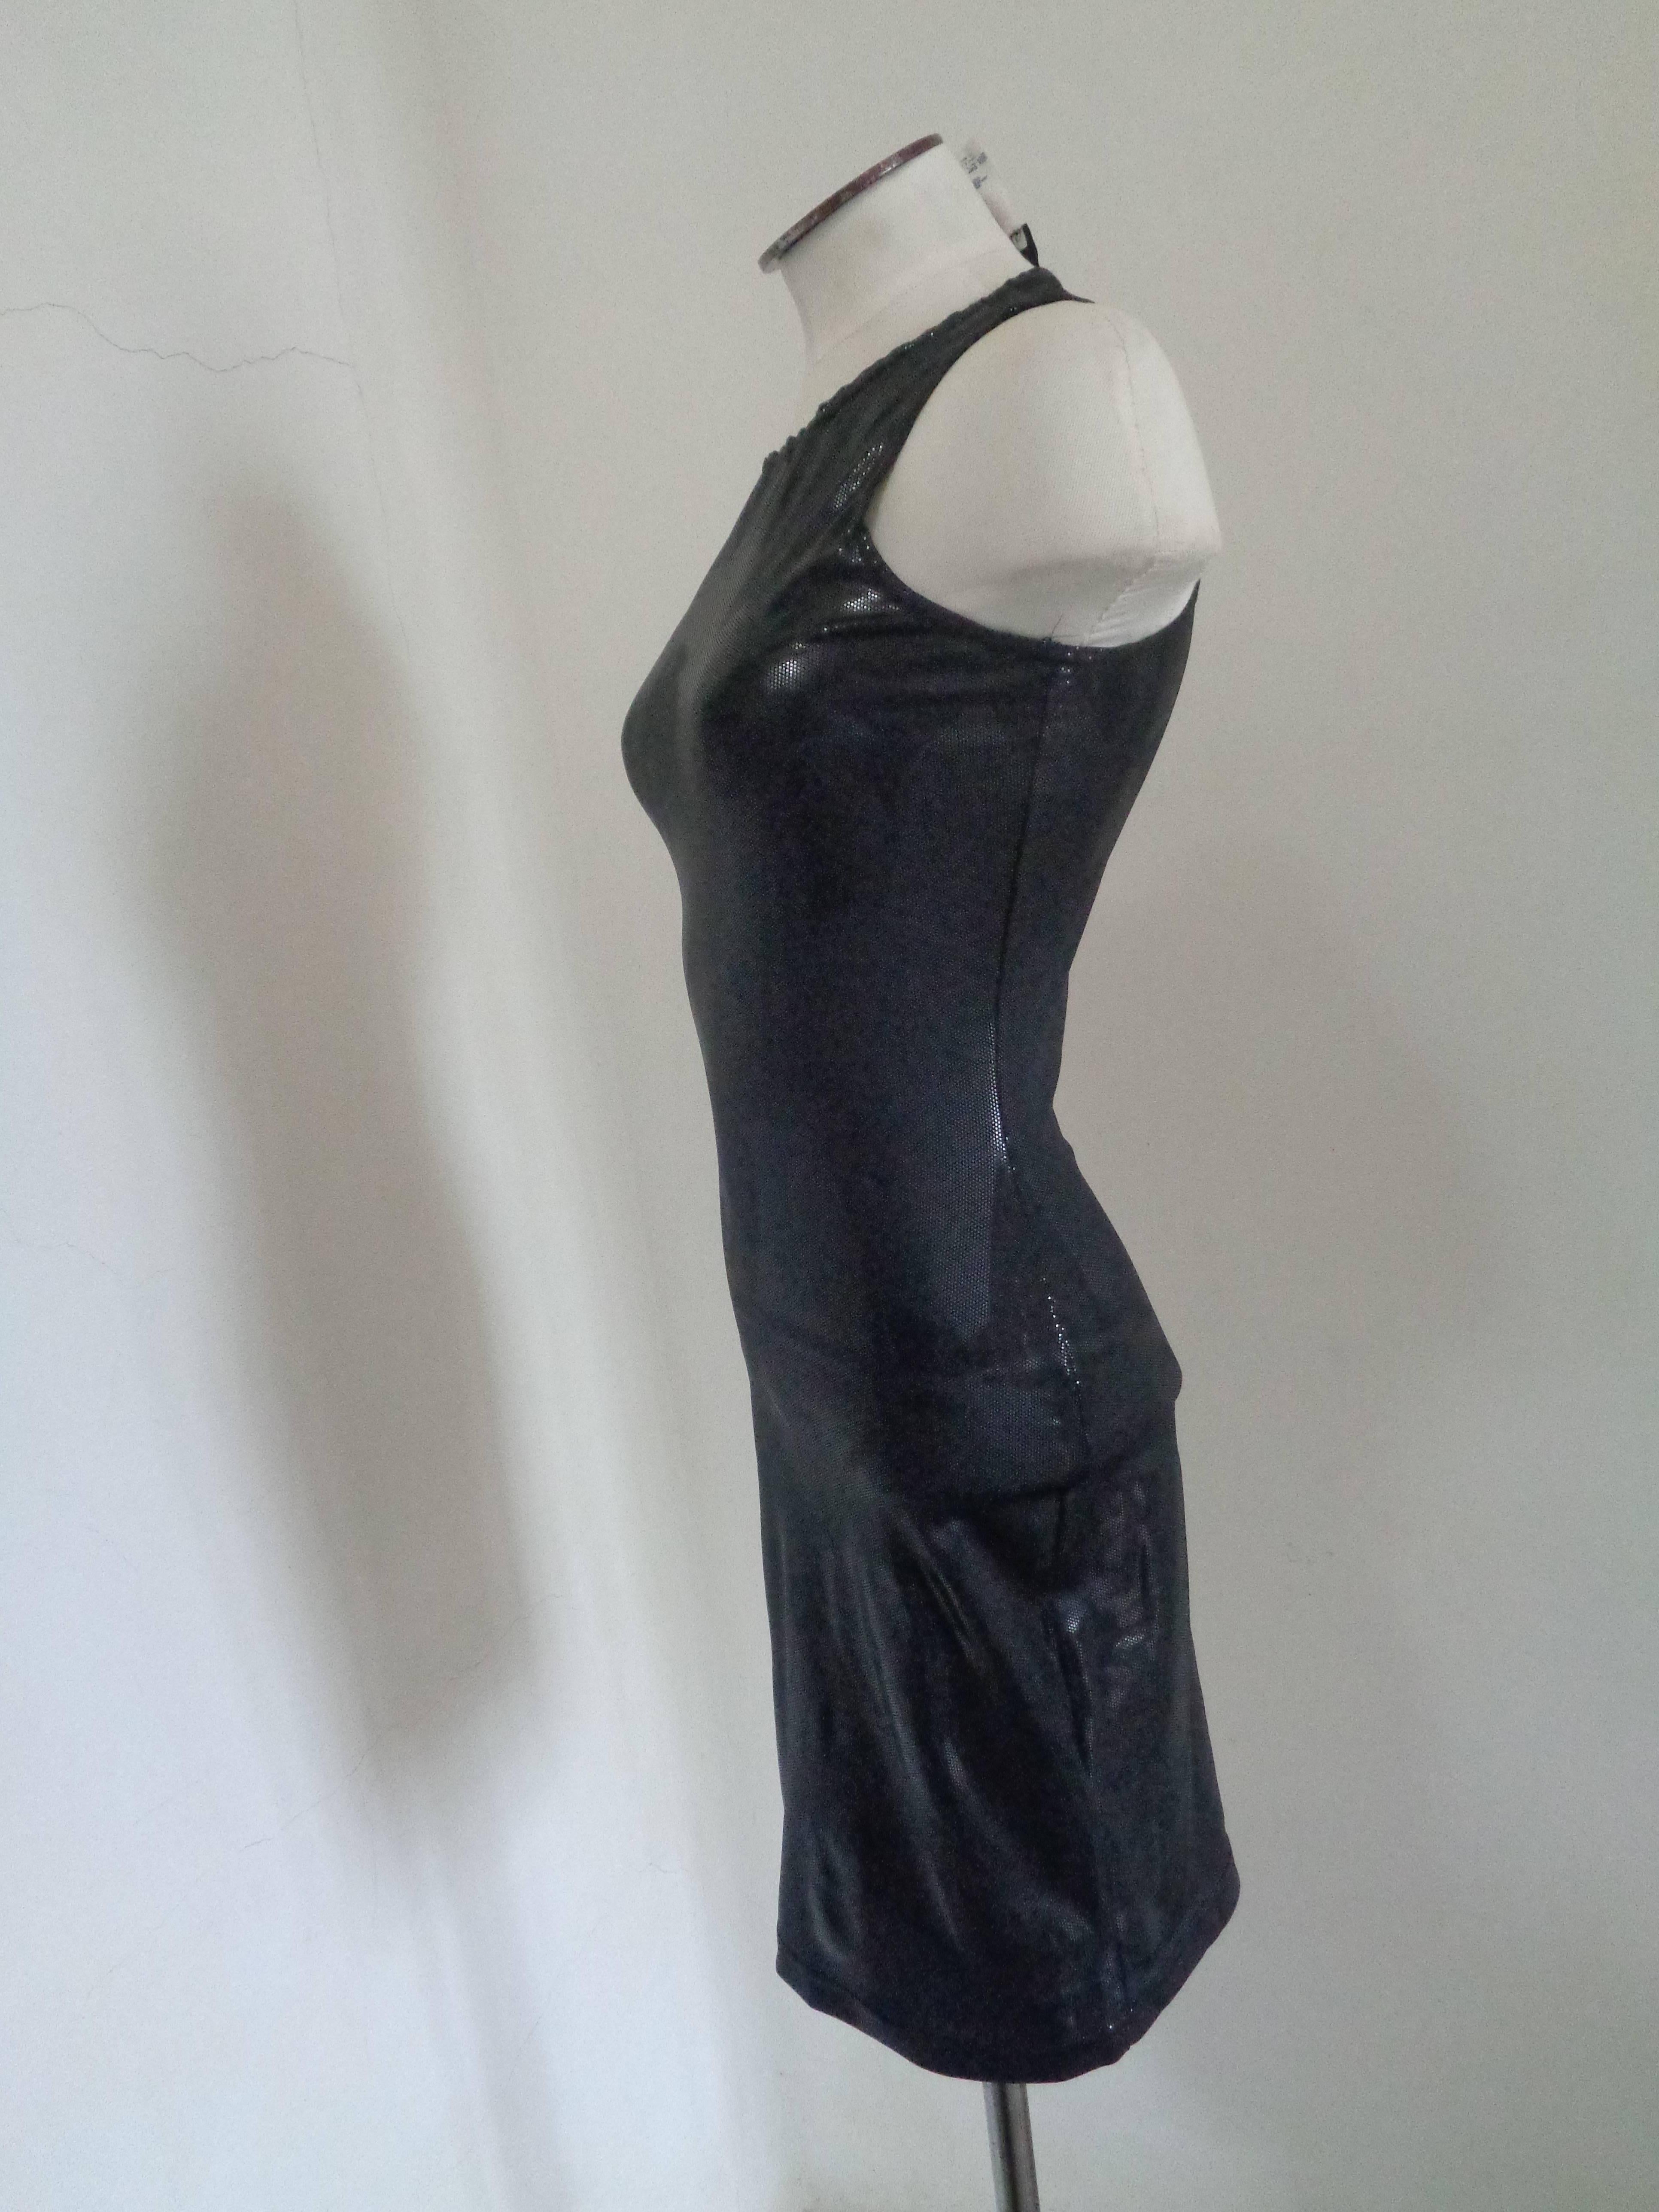 Versace Jeans couture black dress

totally made in italy in size 42

composition: polyamide and spandex